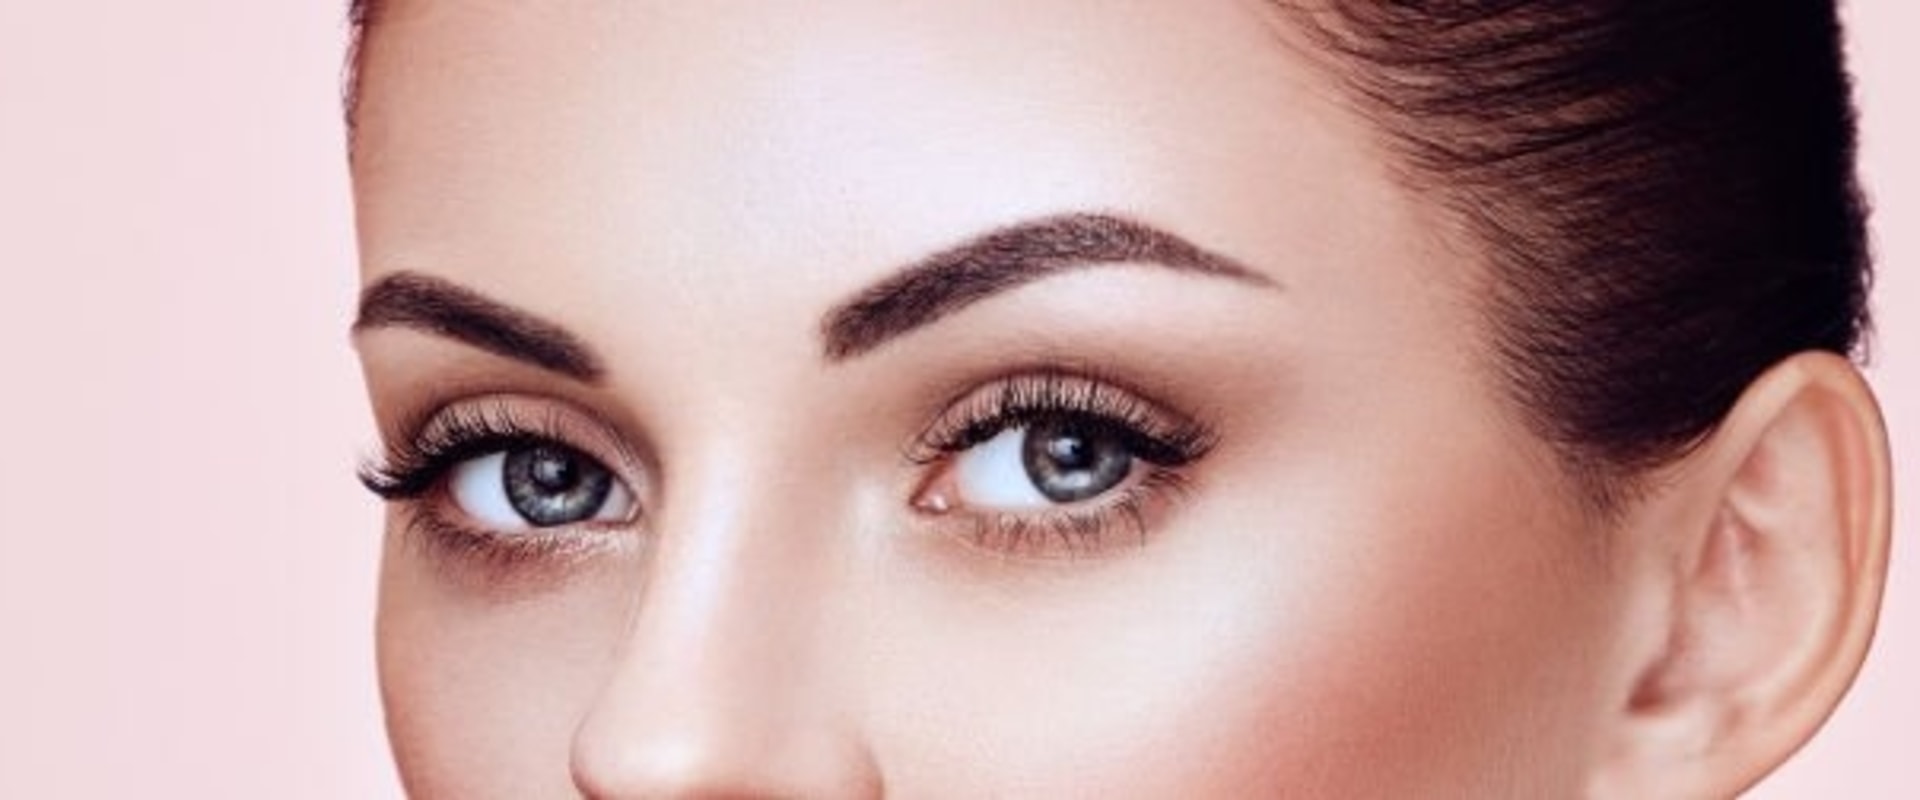 Do eyelash extensions make you look younger?